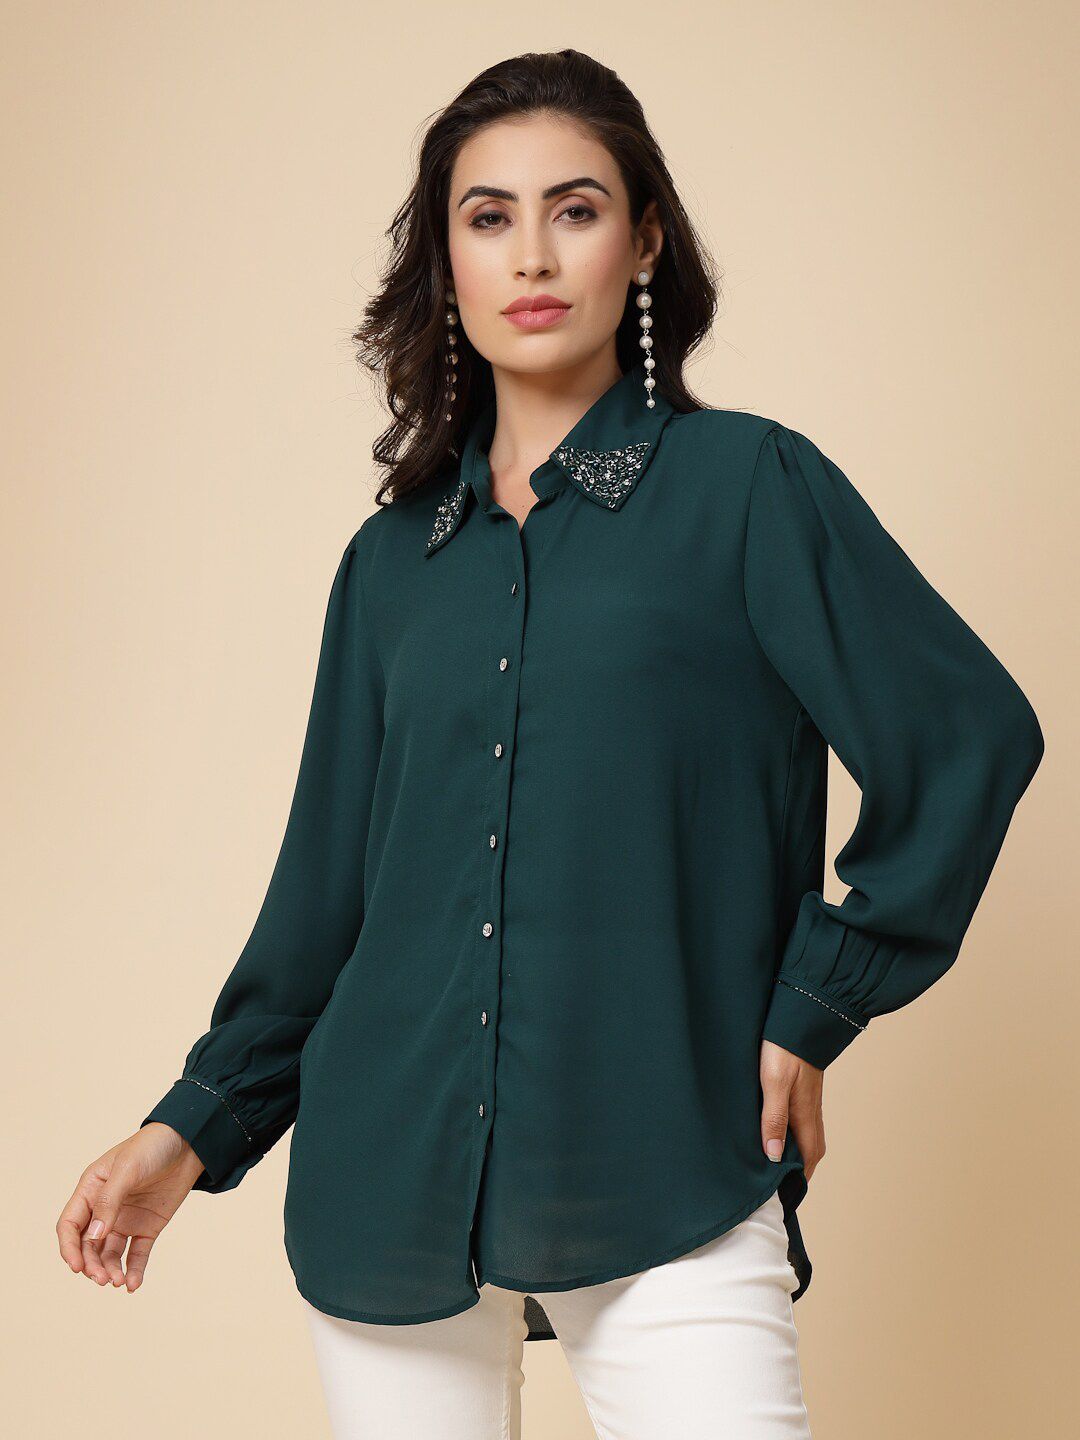 Buy Gipsy Gipsy Embellished Spread Collar Casual Shirt at Redfynd